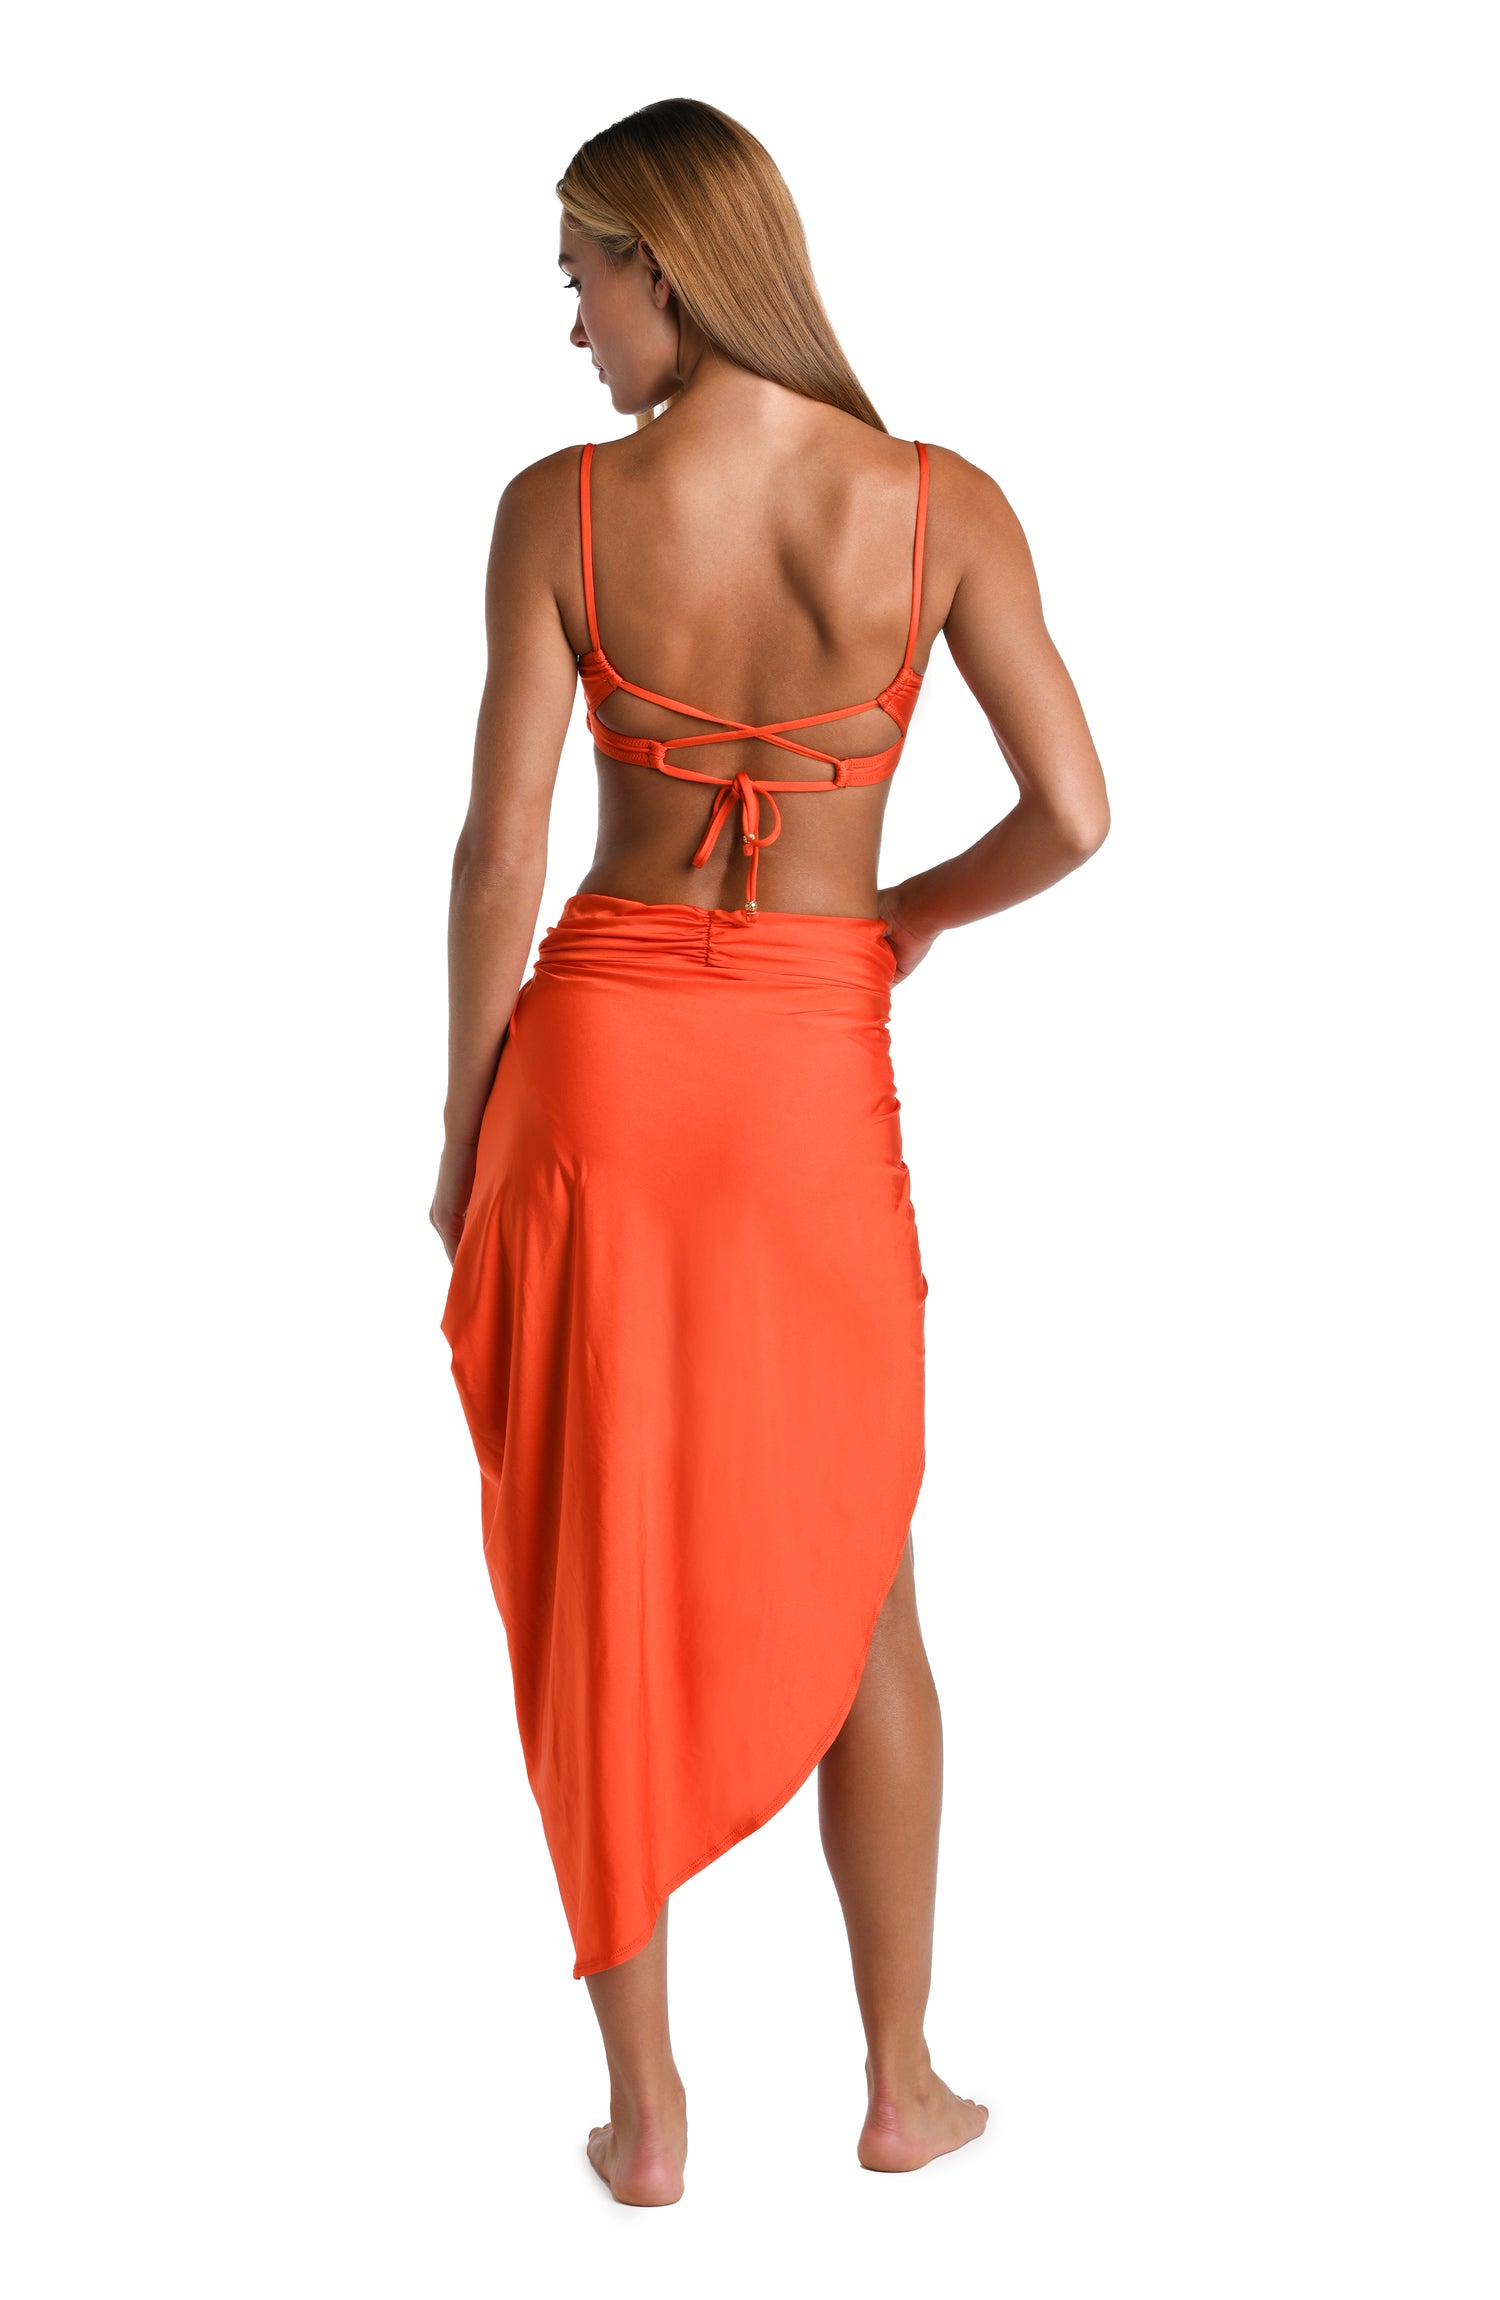 Model is wearing a solid vibrant orange colored Pull-On Faux Pareo Cover Up